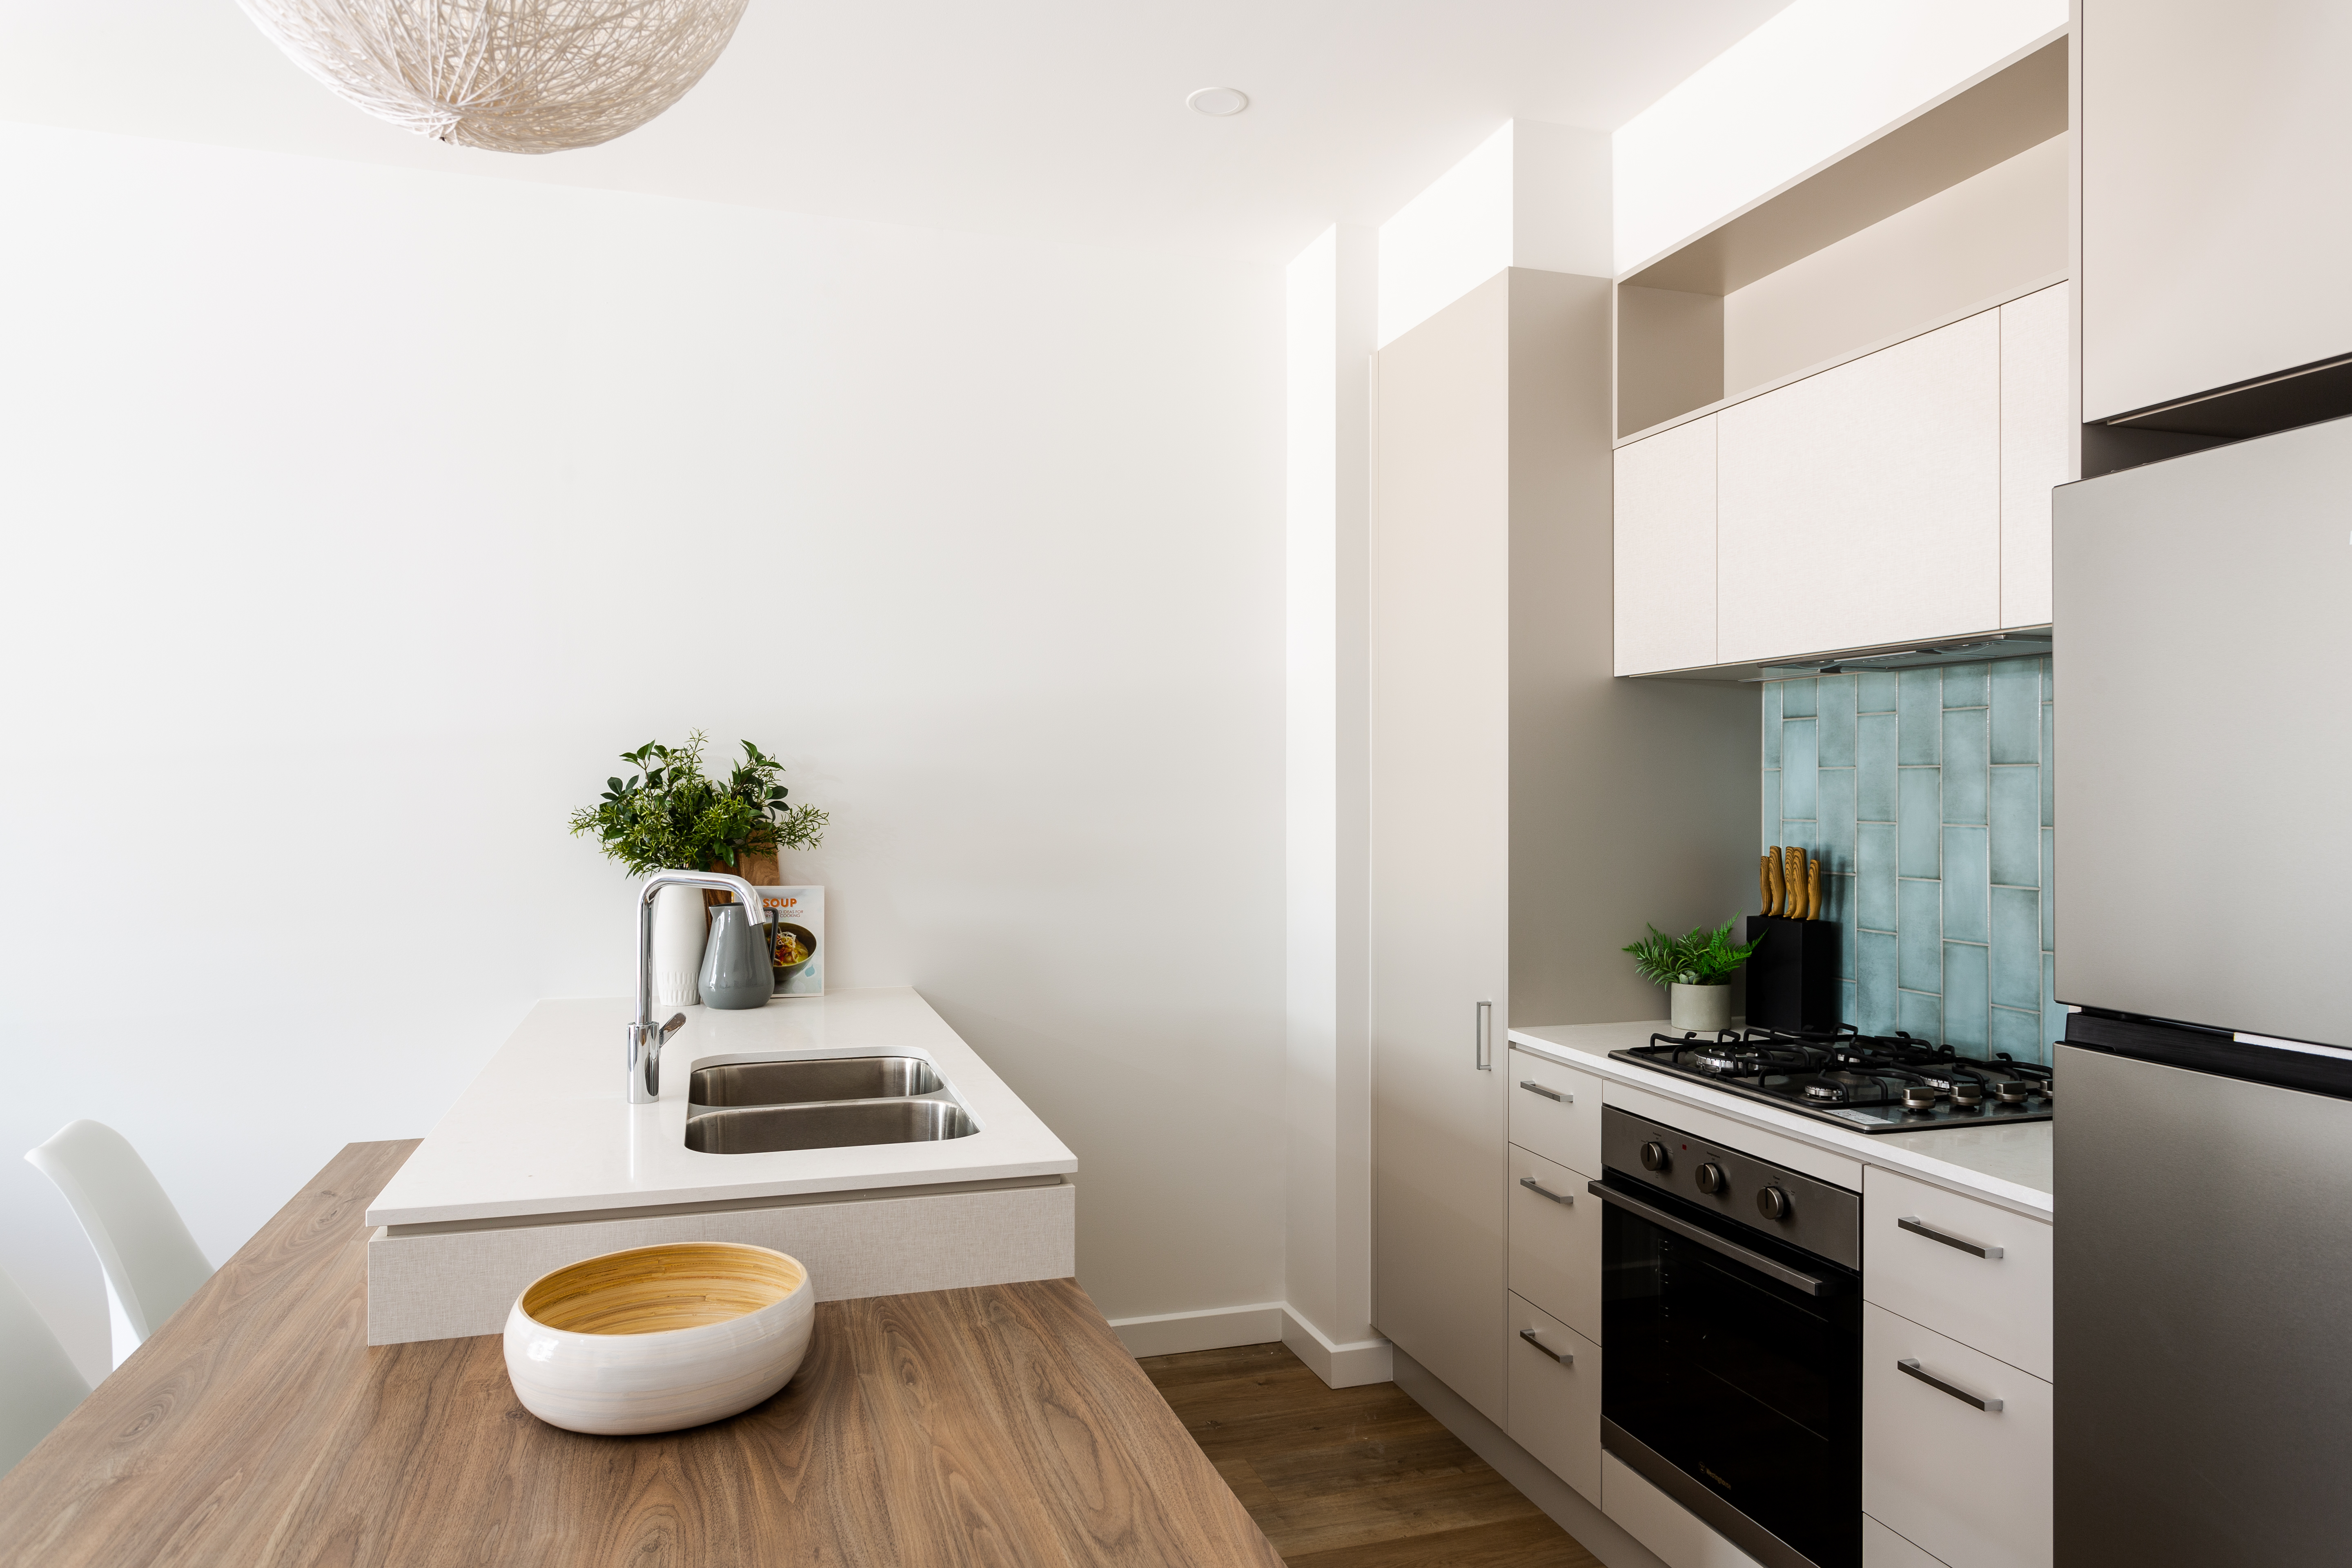 Kitchen - Two Bedroom Apartment - Urban Rest - Albany Lane Apartments - Adelaide